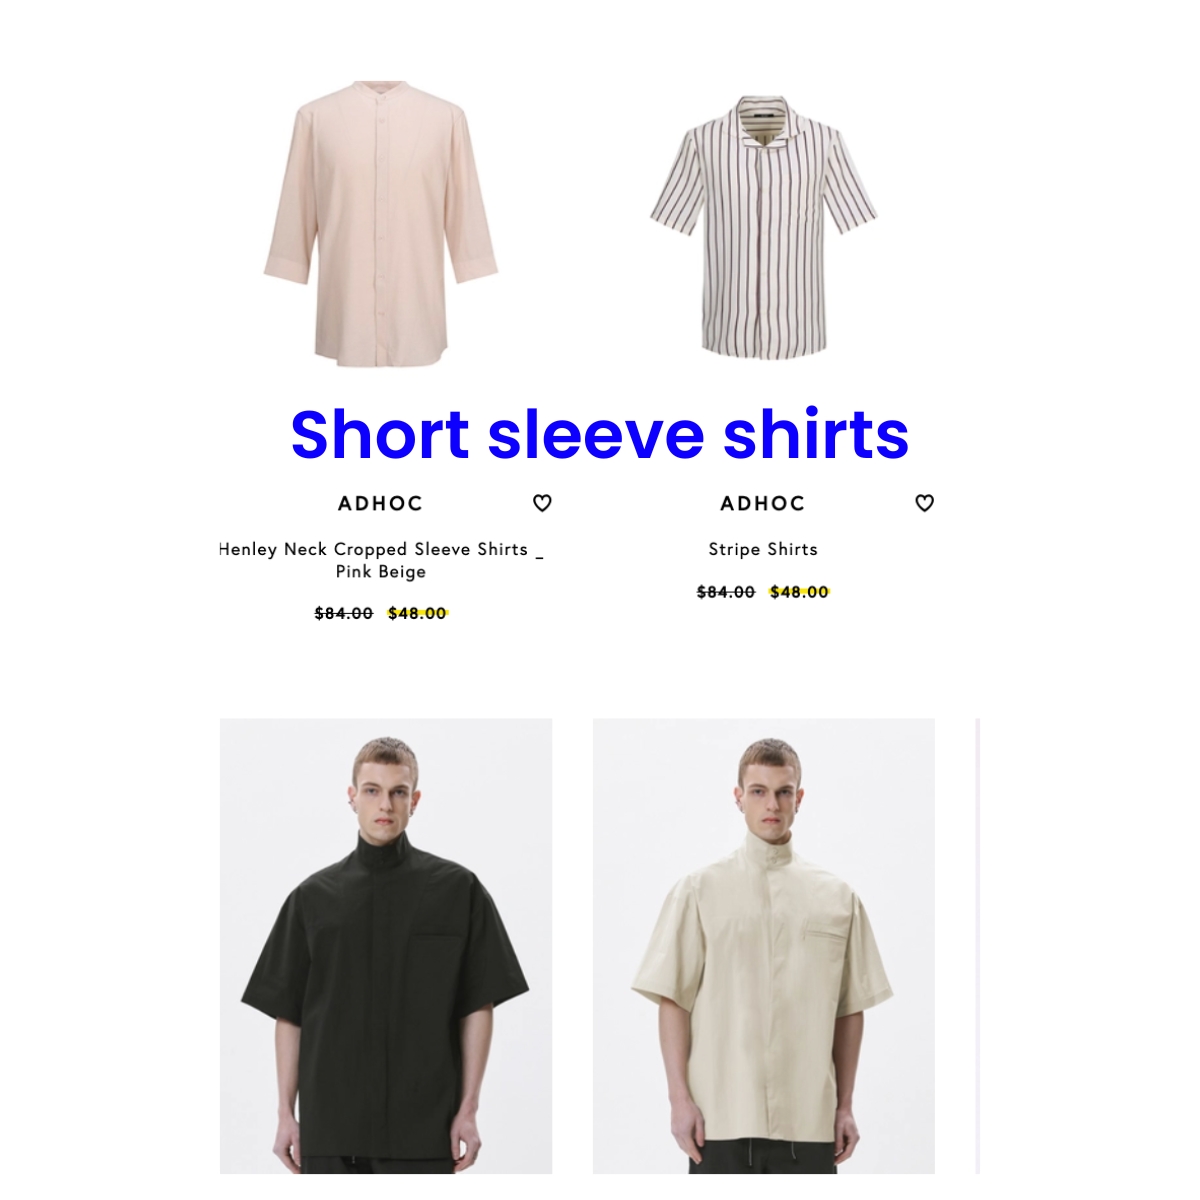 Search results using the YesPlz Virtual Mannequin Filter powered by fashion AI